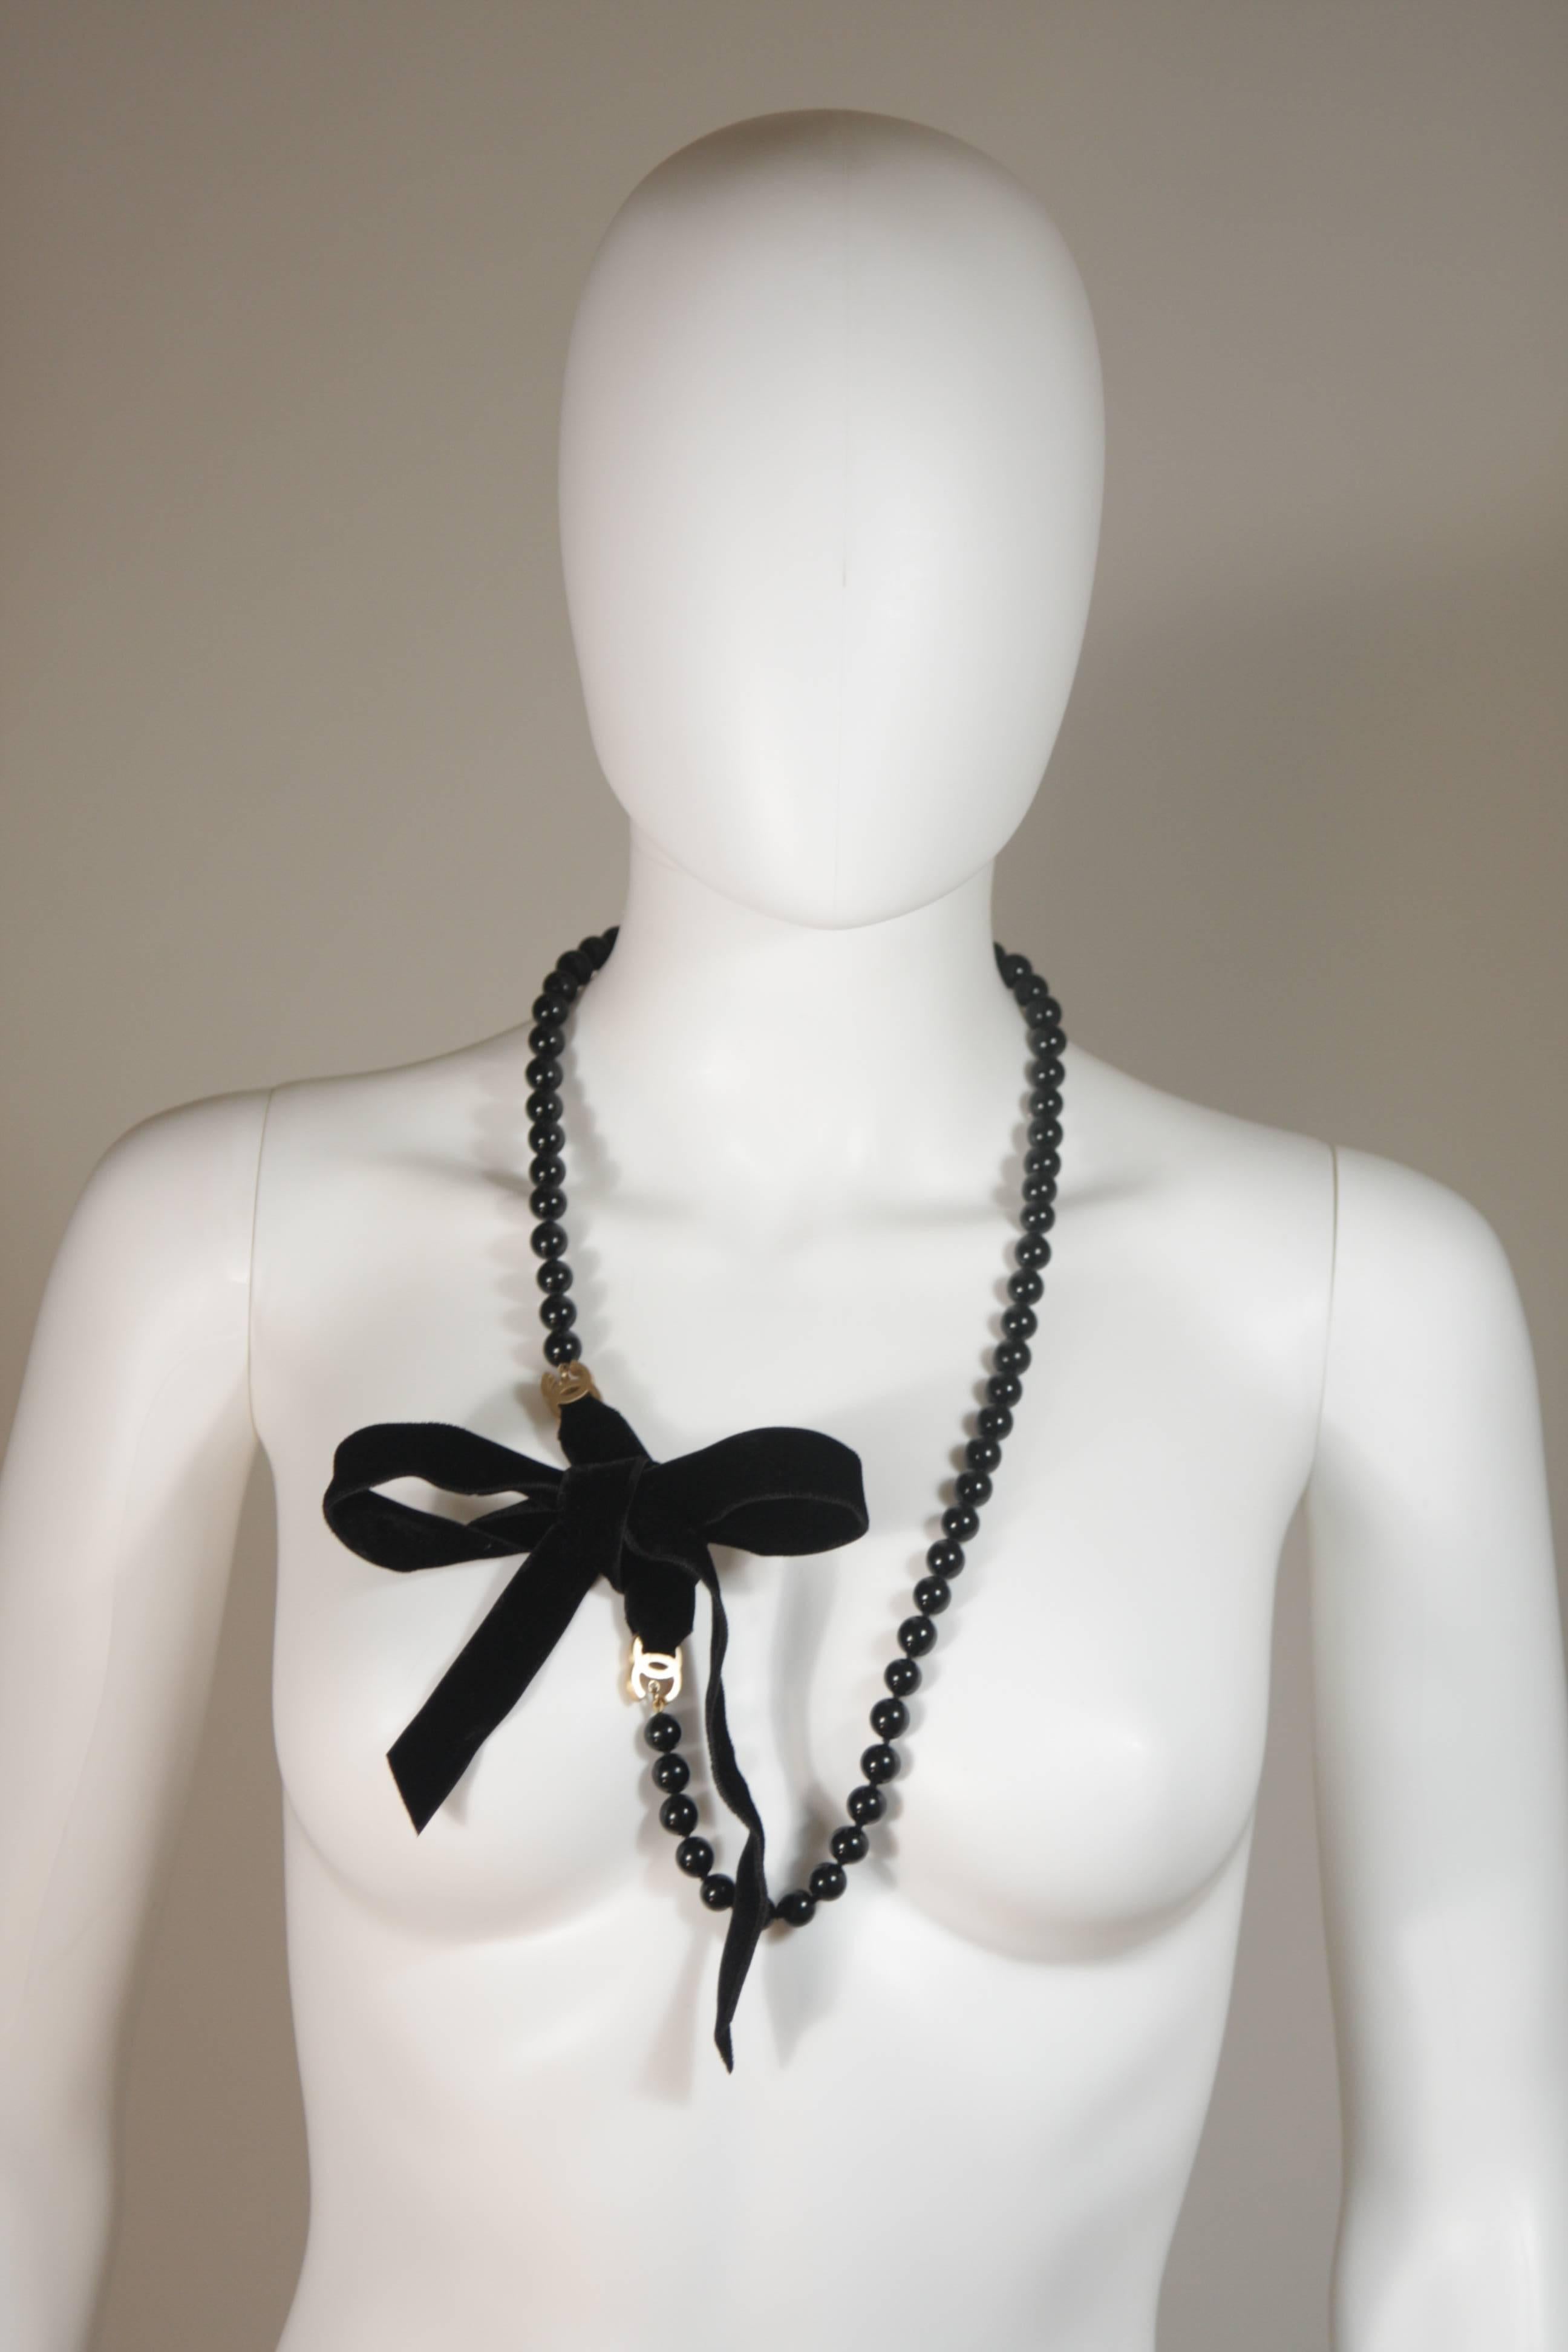 This Chanel design is available for viewing at our Beverly Hills Boutique. We offer a large selection of evening gowns and luxury garments. 

 This Chanel accessory is composed of black beads and features velvet ties with gold hue hardware. In